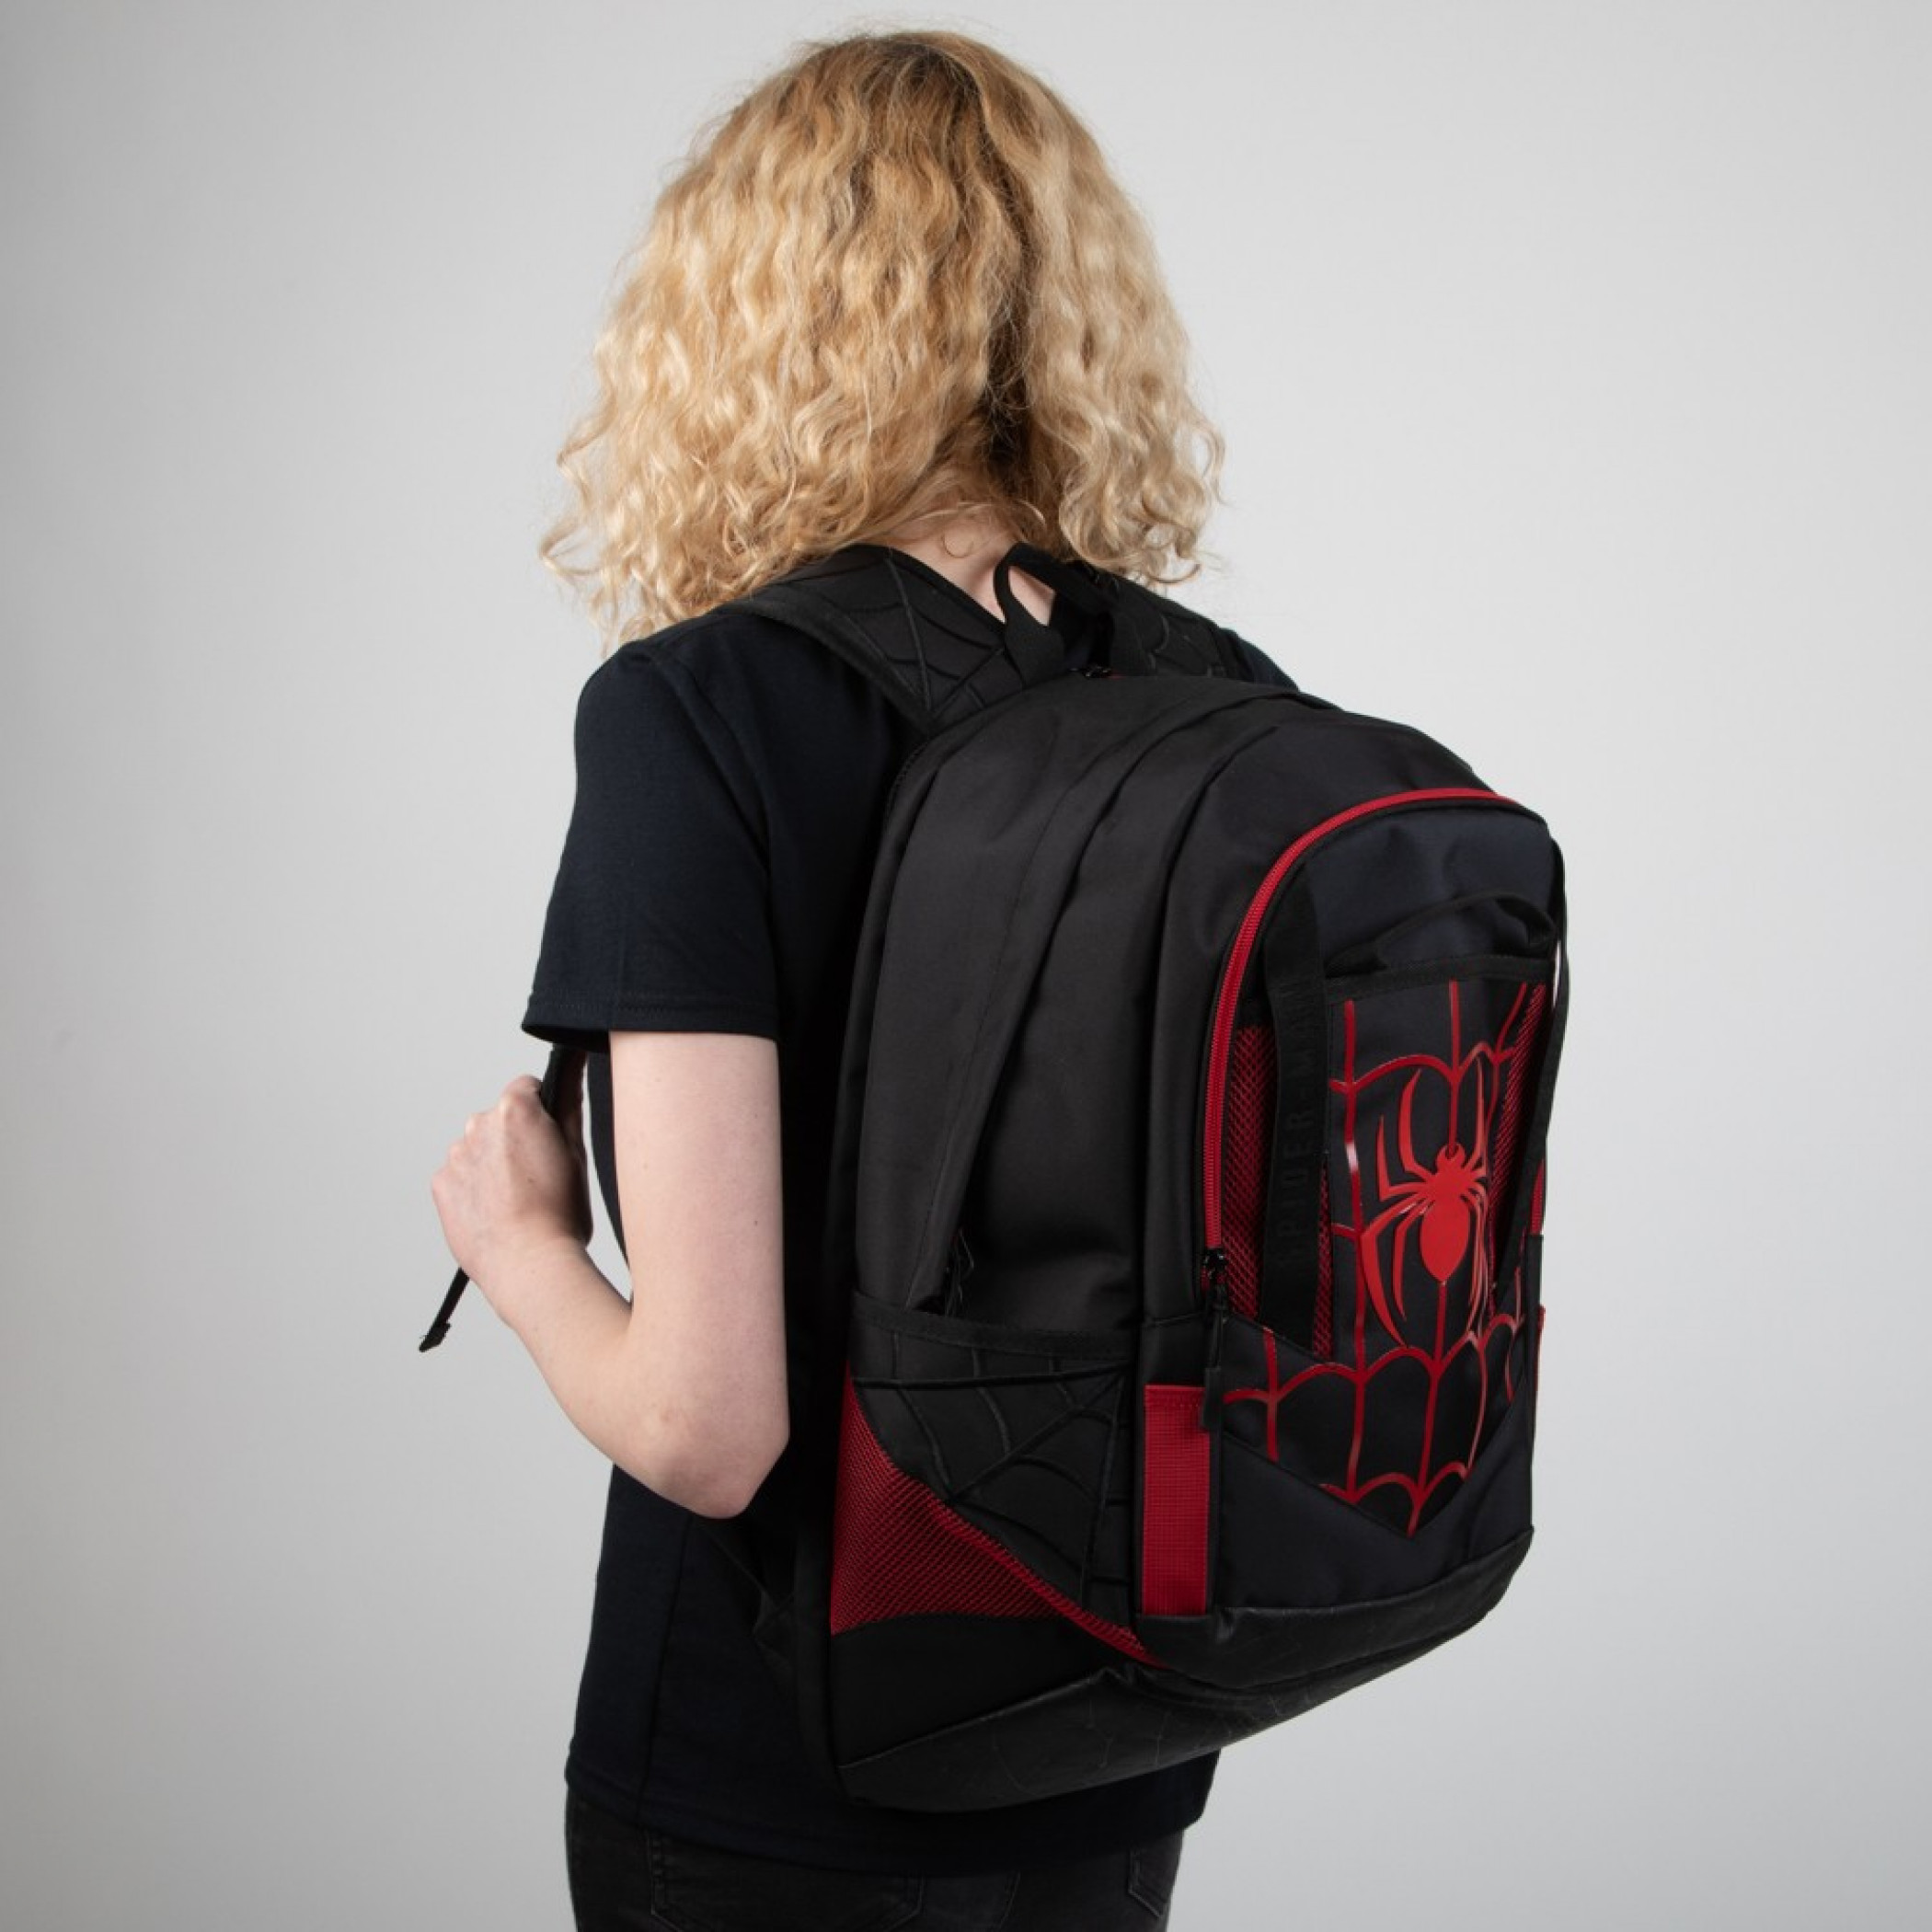 Spider-Man Black and Red Laptop Backpack